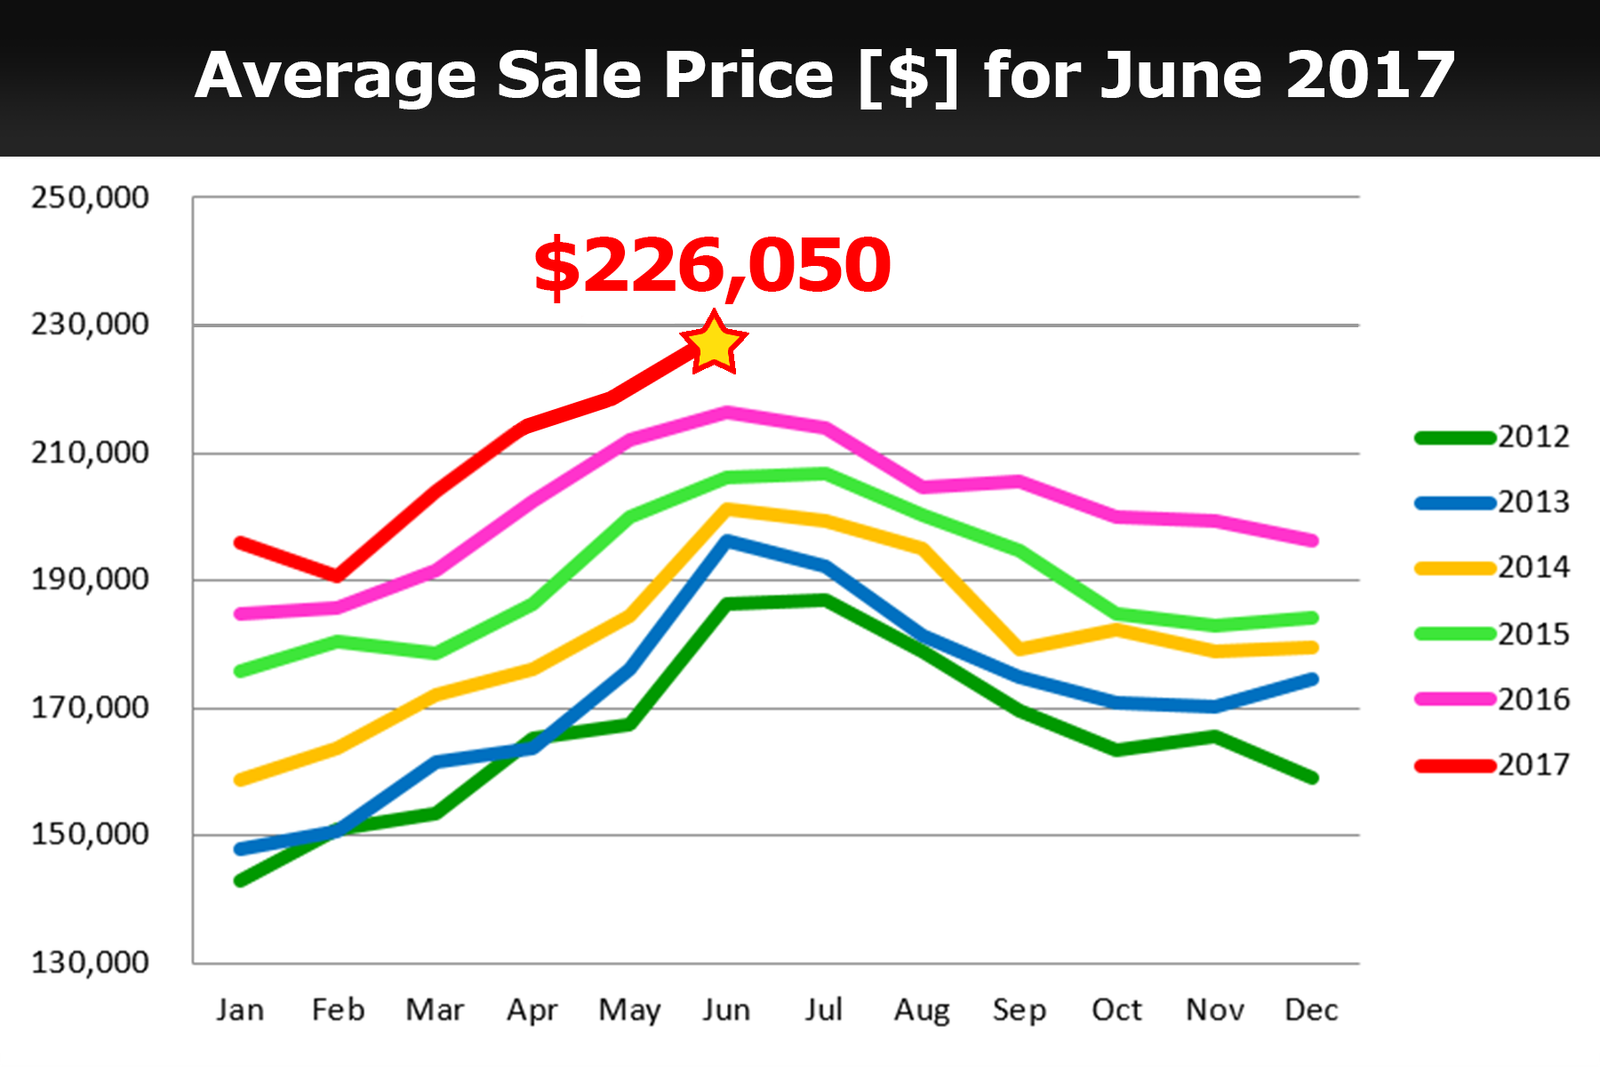 Median Sale Price at Record High & More Pending Contracts